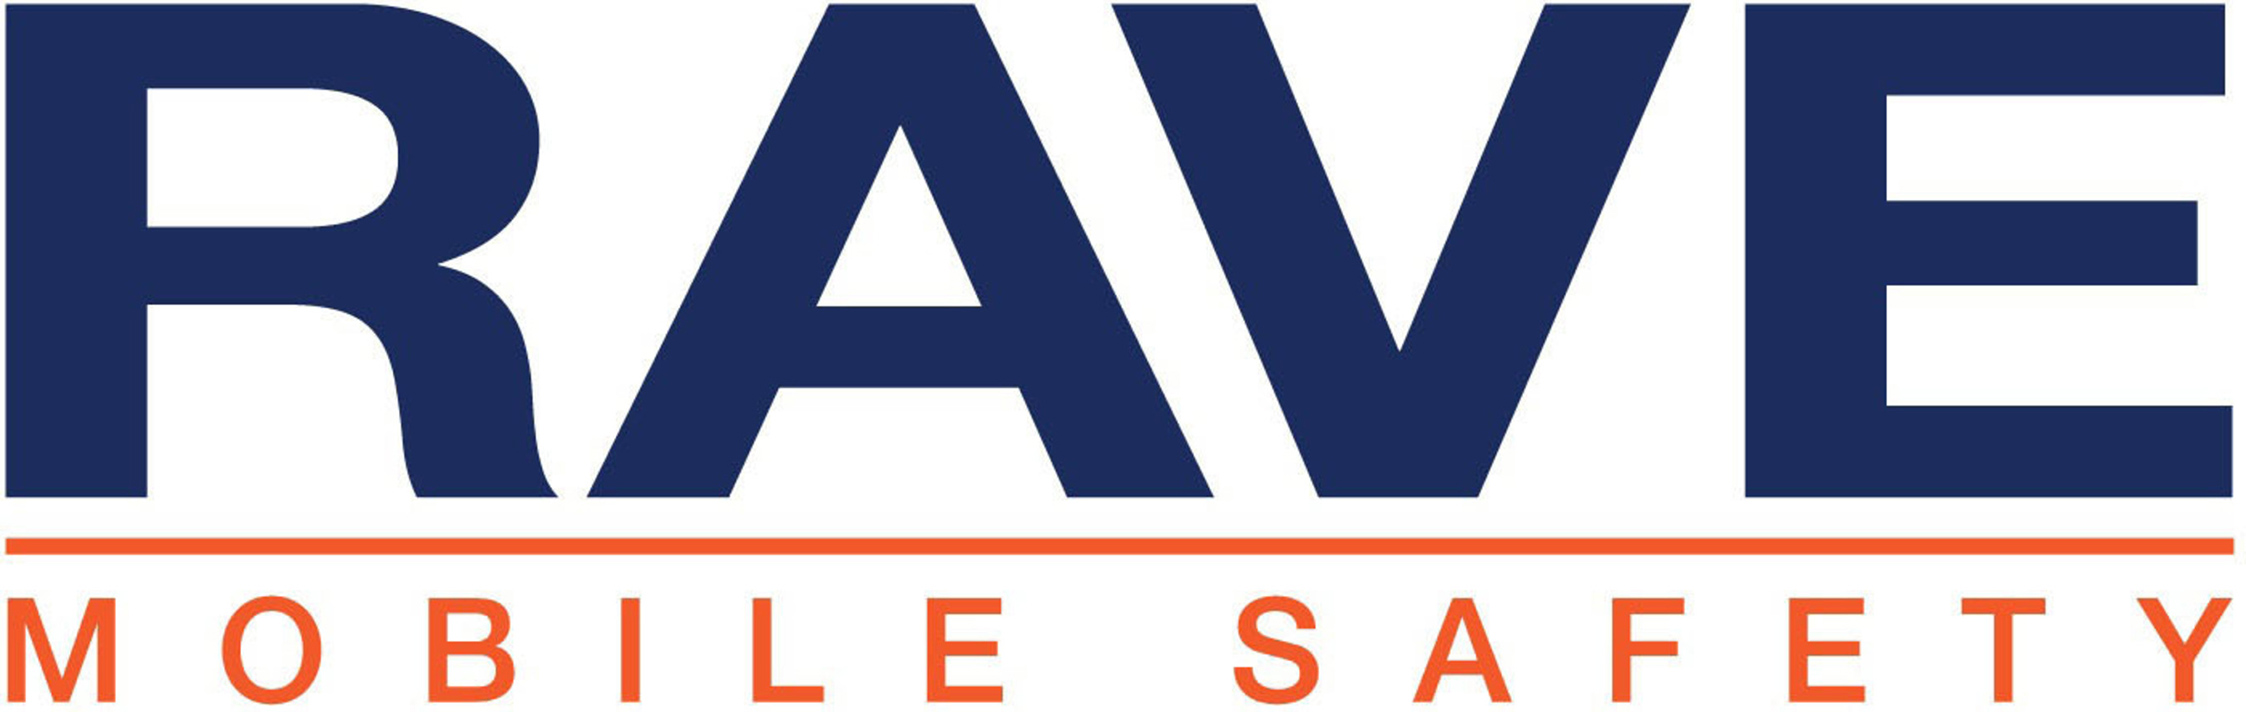 Rave Mobile Safety Logo, Industry Today